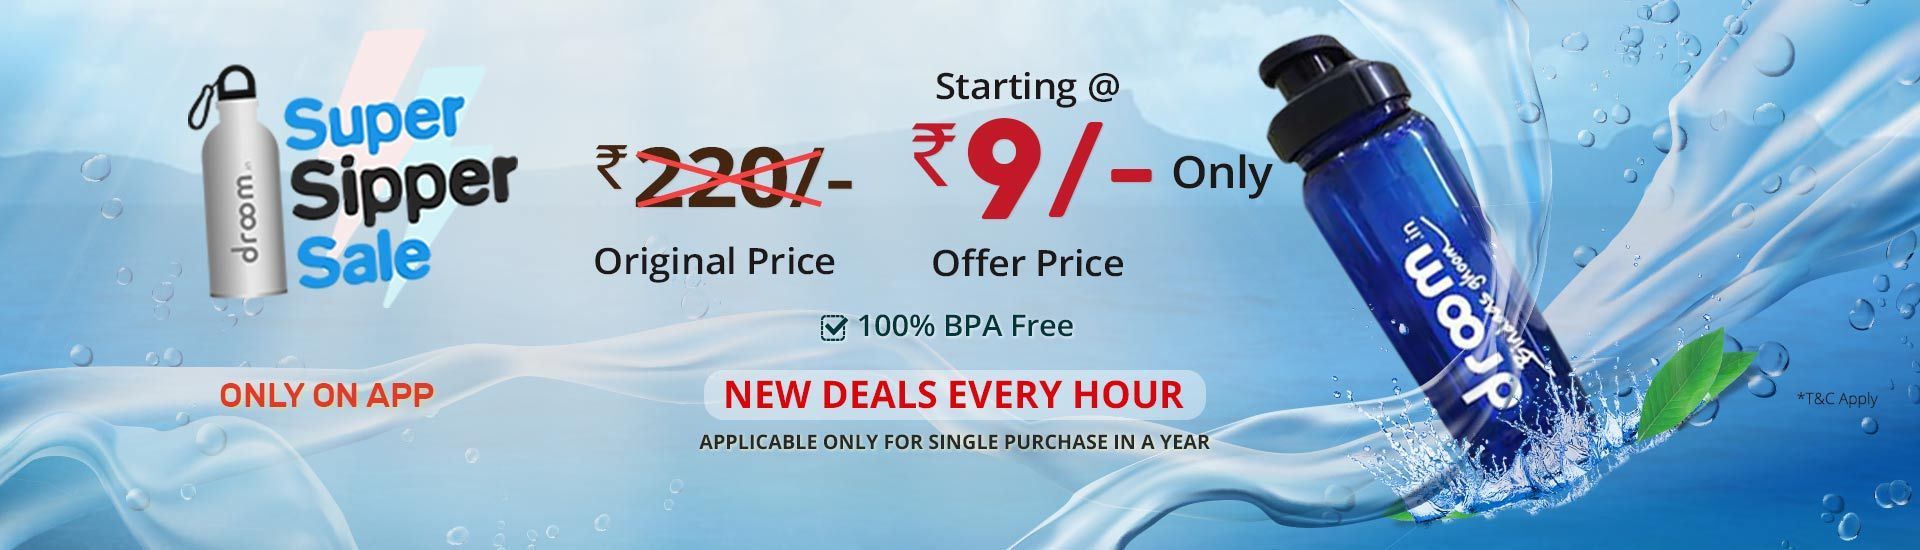 Droom - Super Sipper Sale Worth Rs.220 @ Rs.9 Only